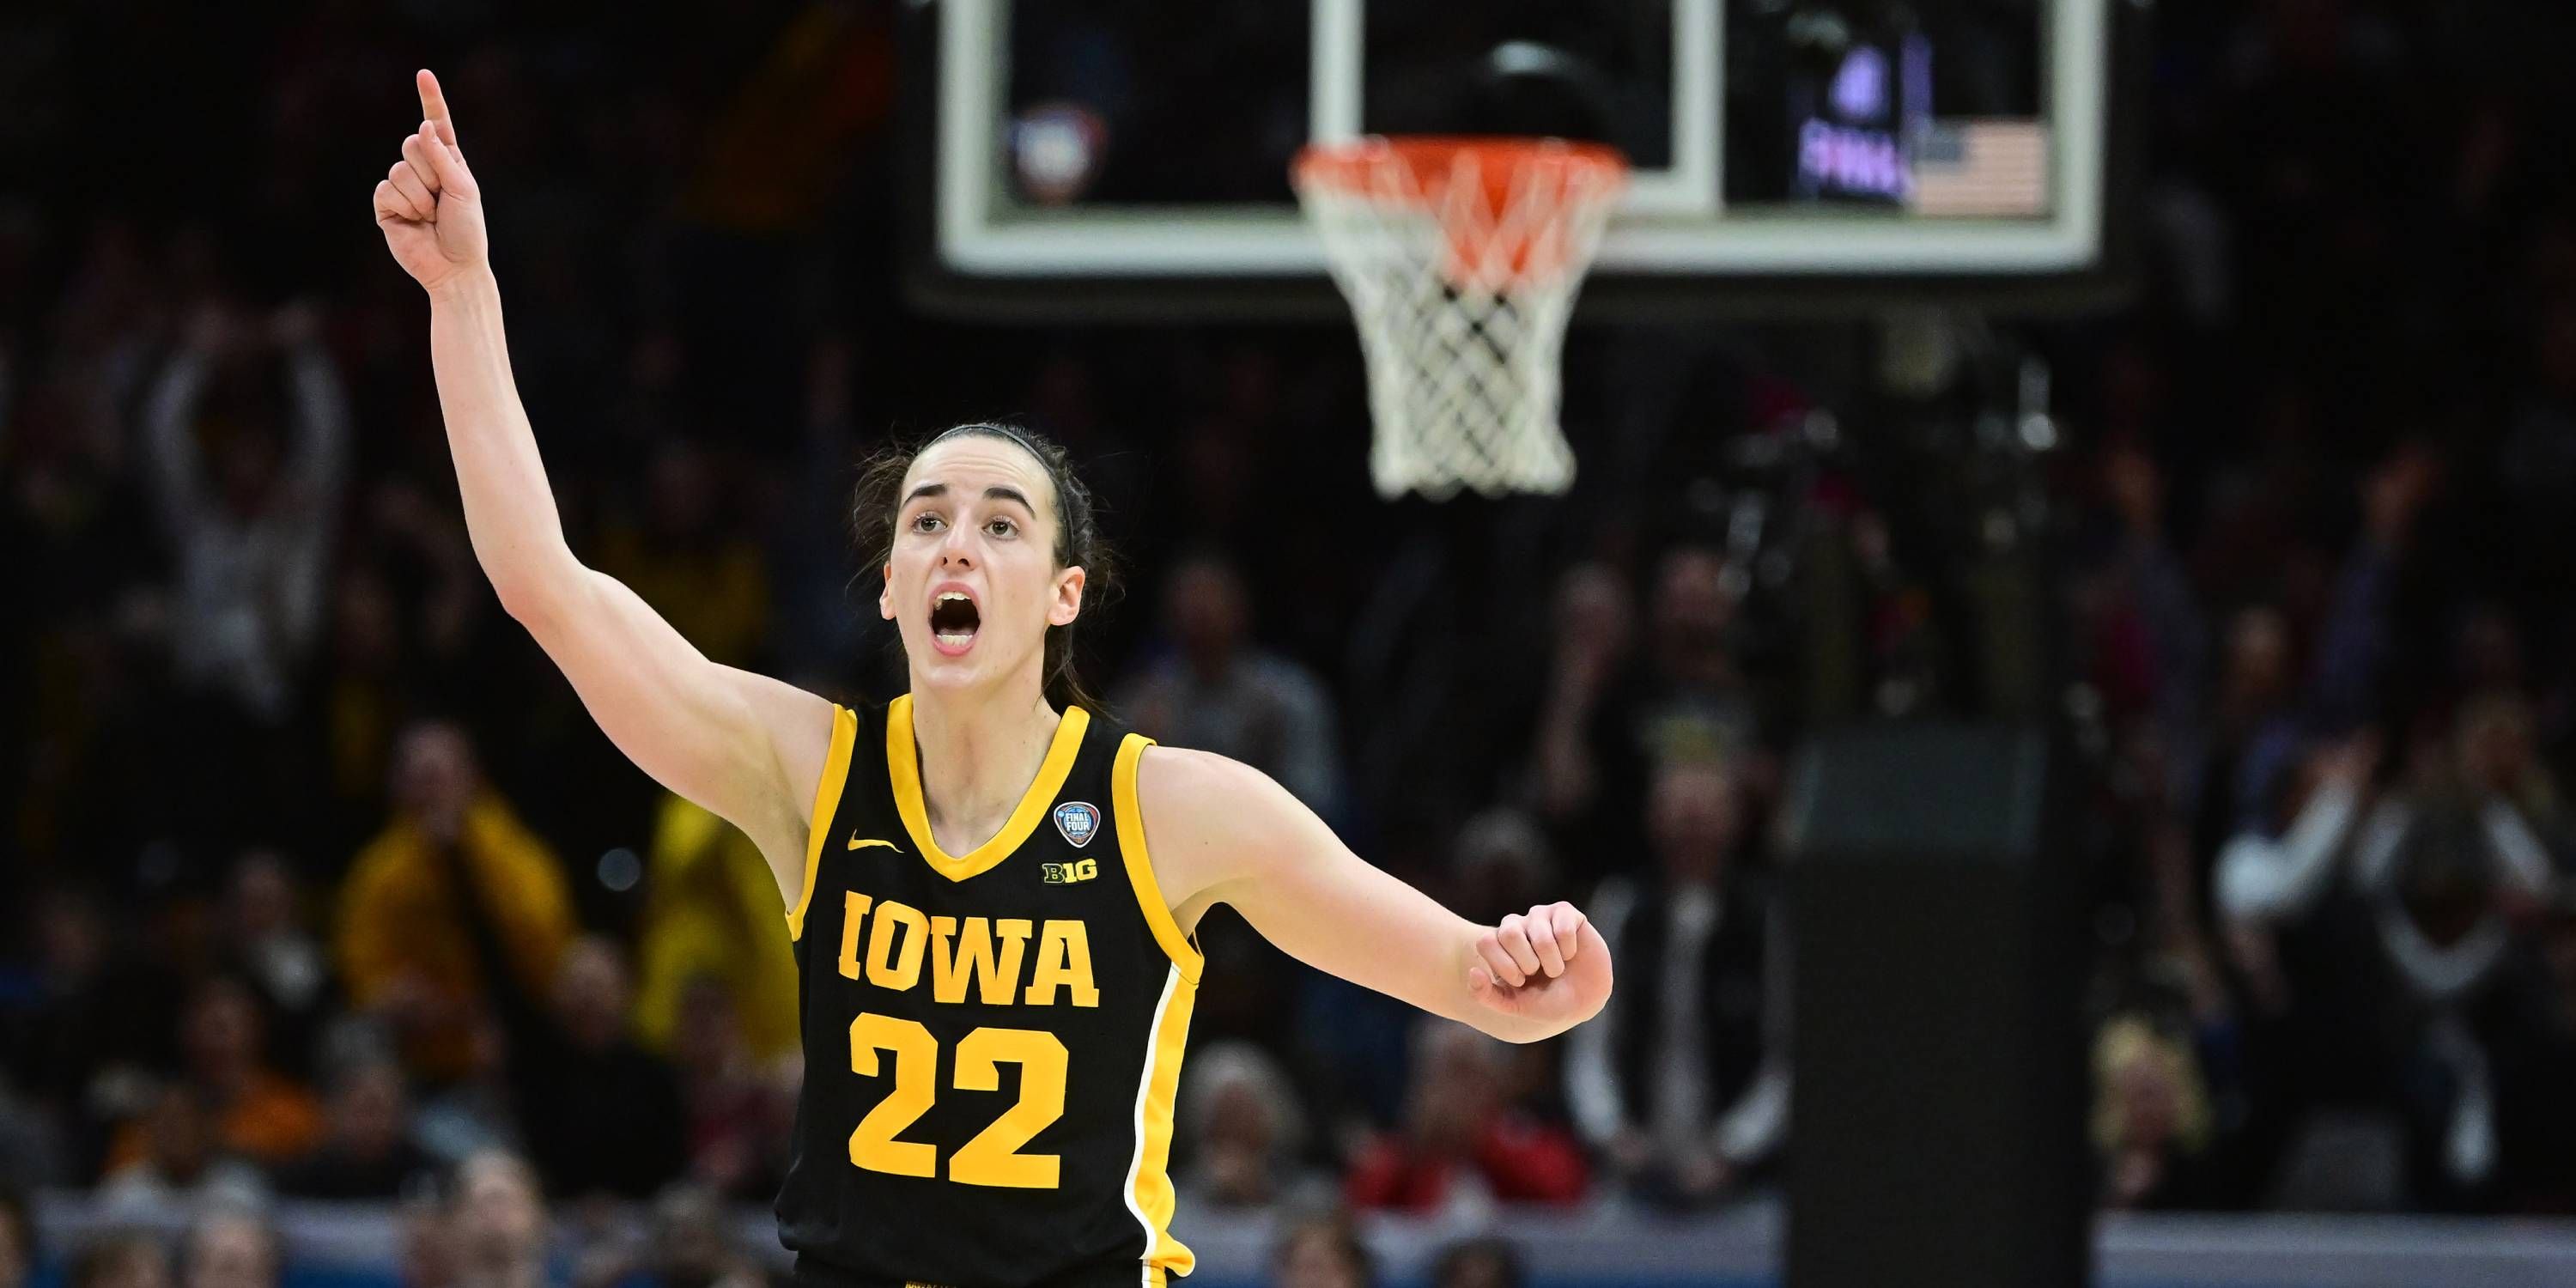 Suns’ Frank Vogel Compares Iowa’s Caitlin Clark to Stephen Curry